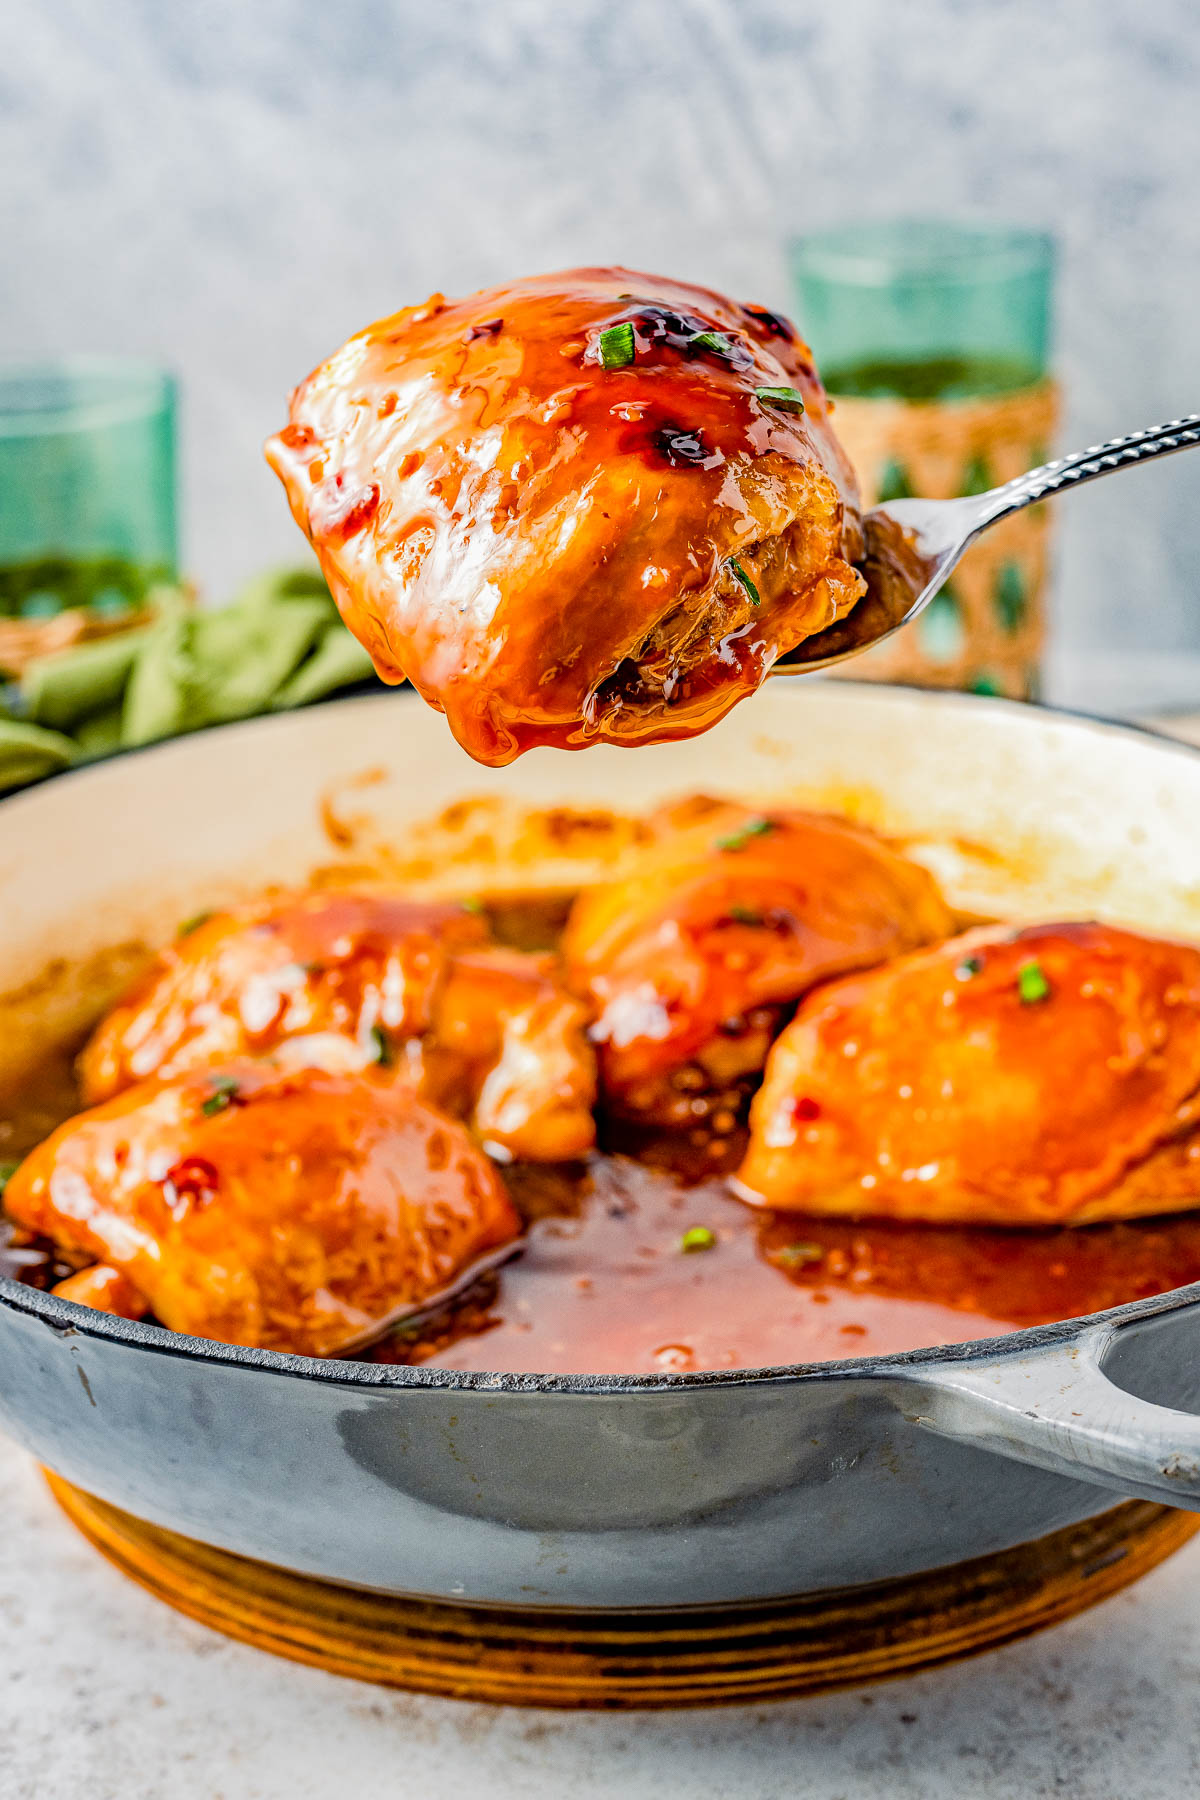 A spoon lifting a glazed chicken thigh from a skillet, with more chicken and sauce in the background, garnished with herbs.